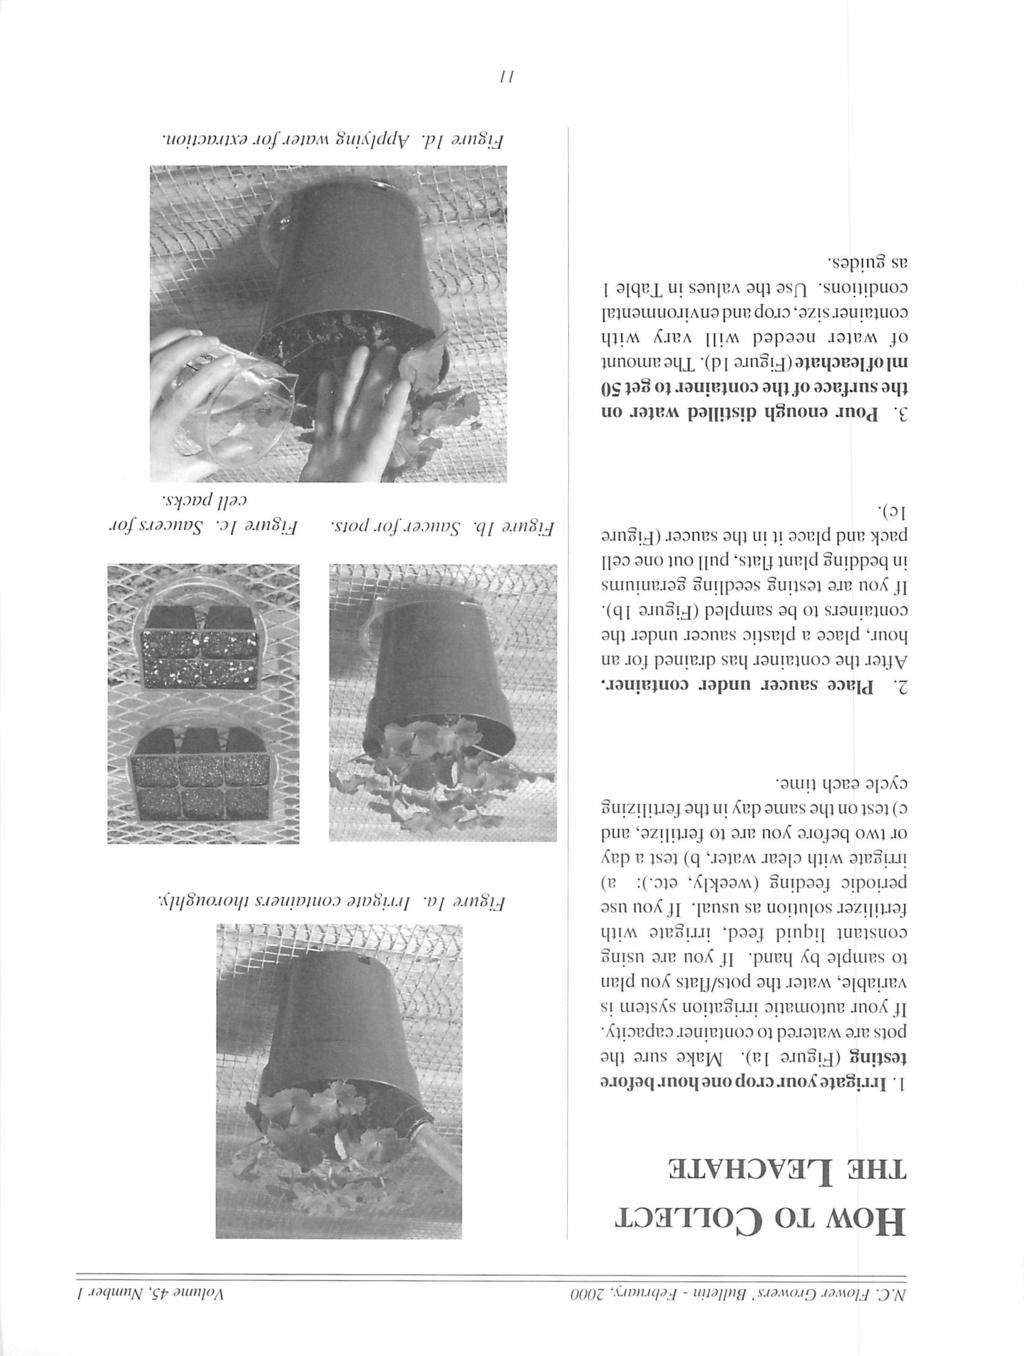 N.C. Flower Growers' Bulletin - Februry, 2000 Volume 45. Number I How to Collect the Lechte. Irgte yourcroponehourbefore testing (Figure l). Mke sure the pots re wtered to continer cpcity.